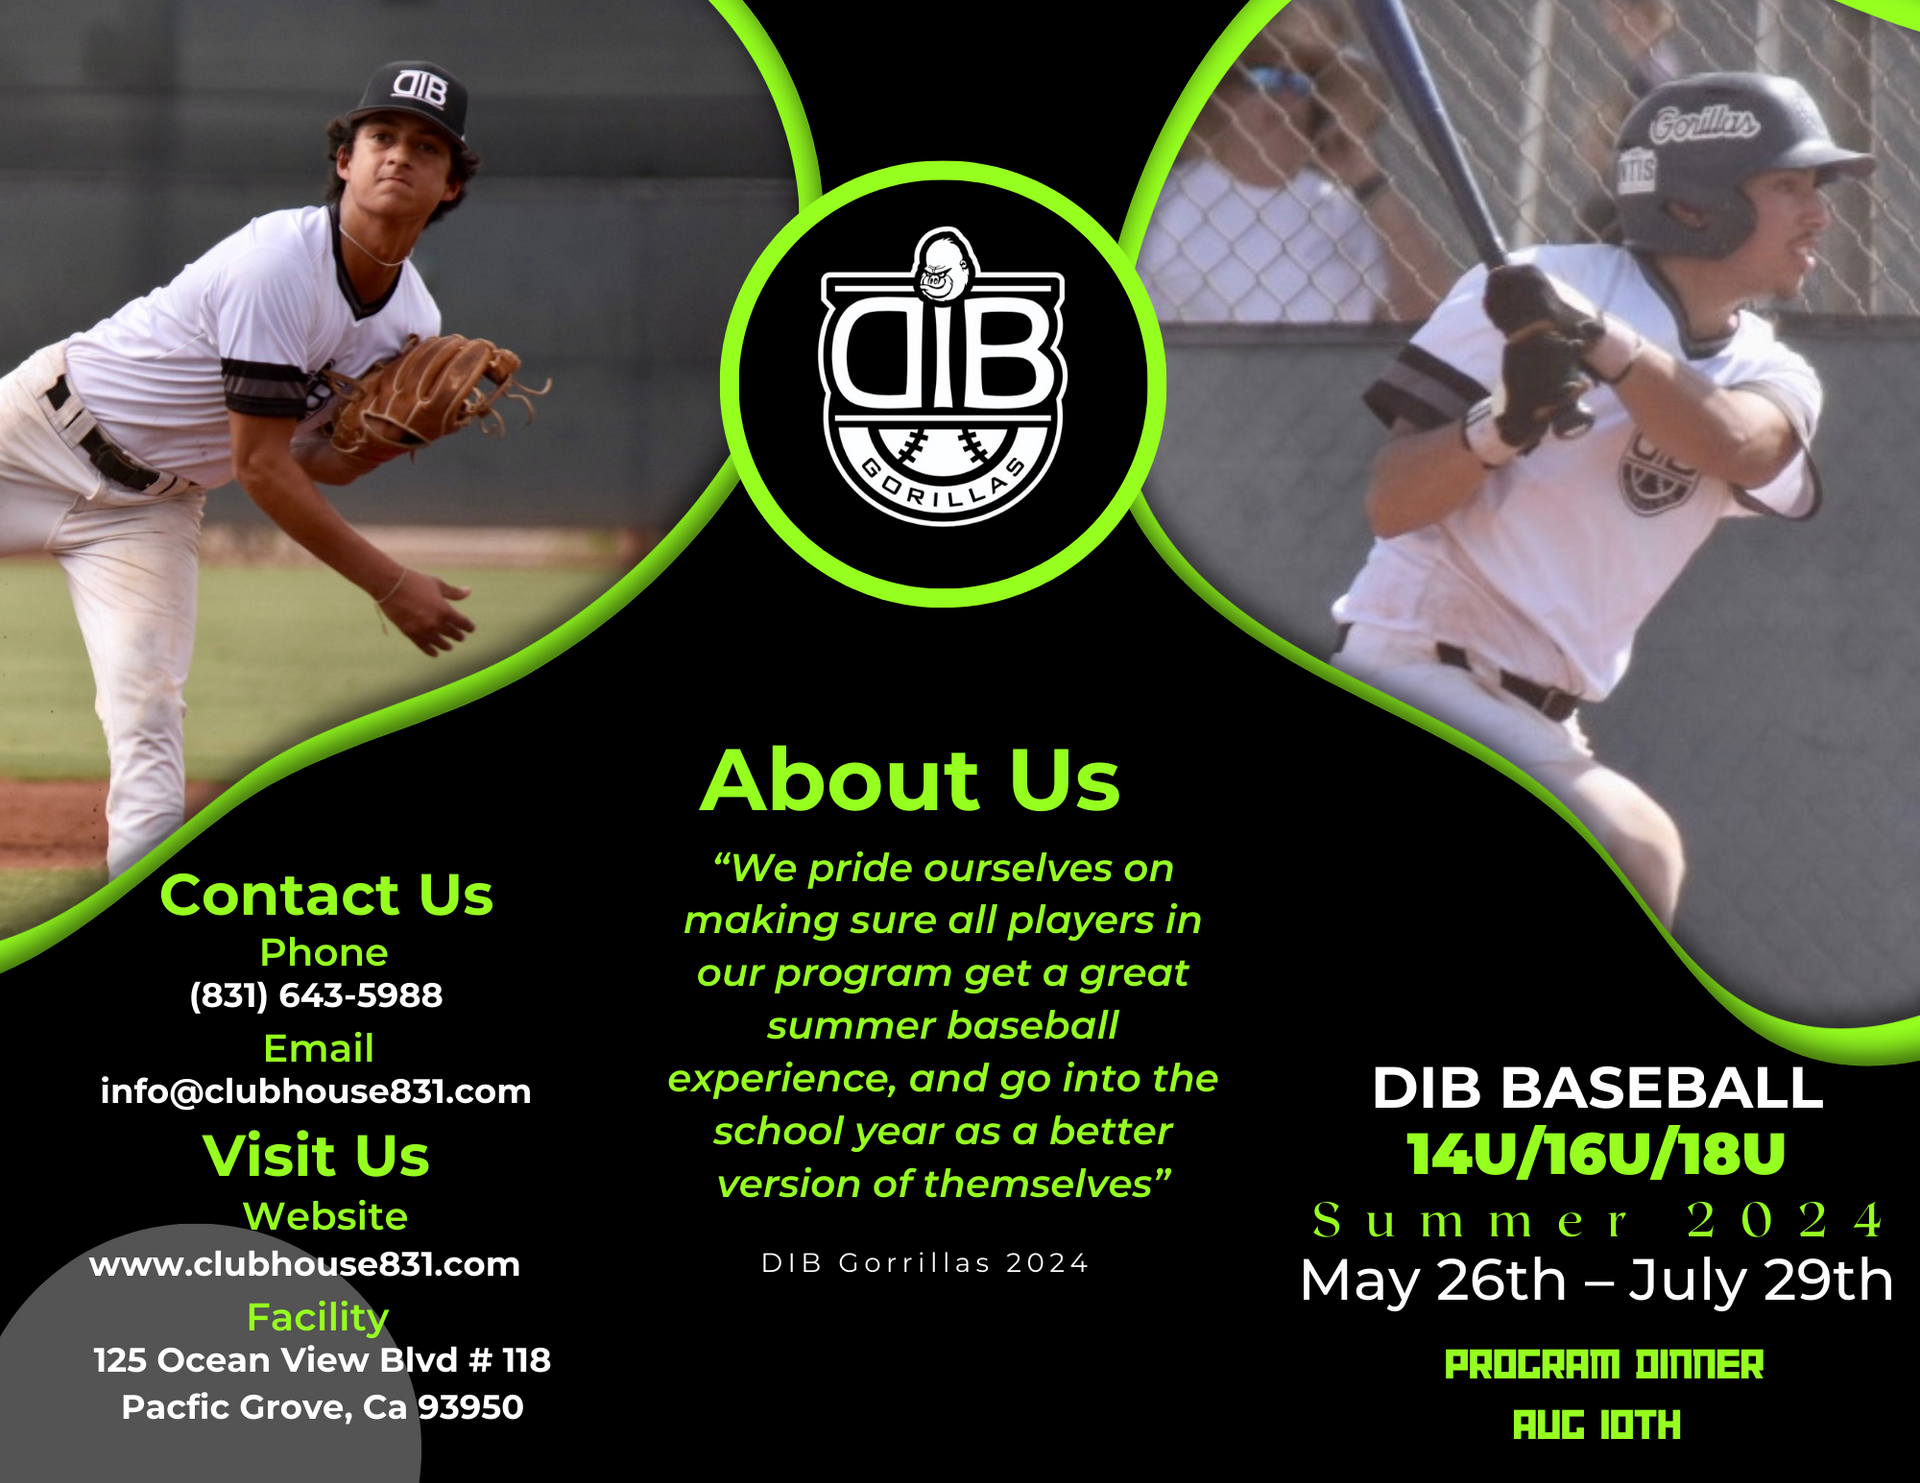 An advertisement for dib baseball shows a pitcher and a batter